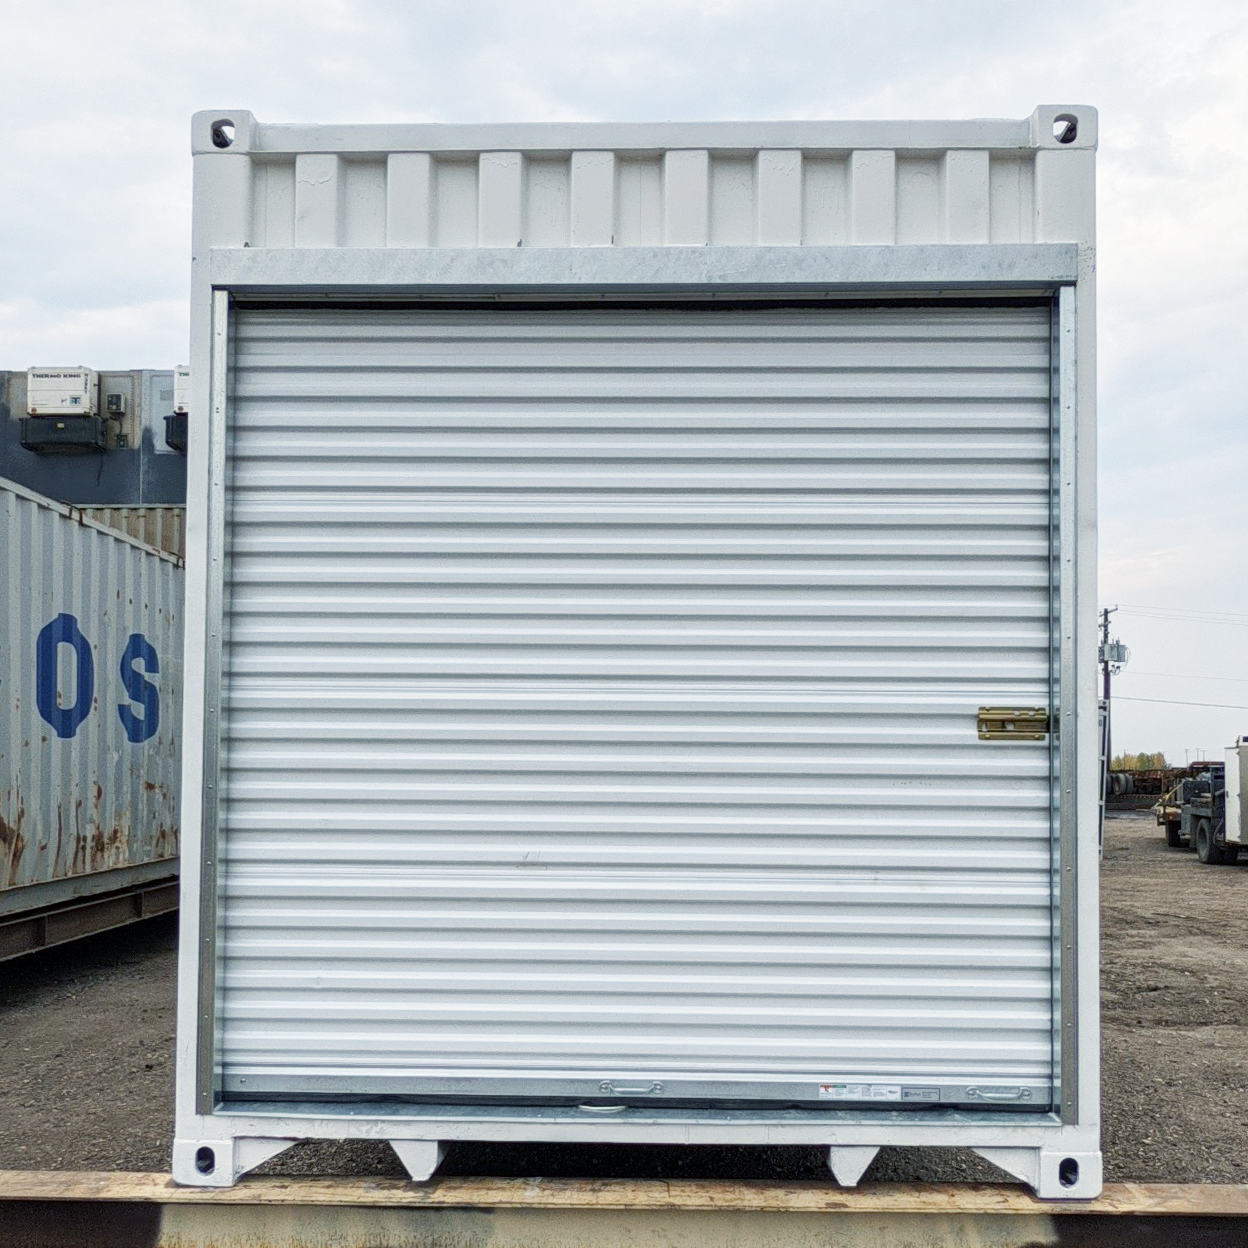 High Cube (9'6" Tall) End Wall Galvanized RUD Framing Kit (7' x 7'3") - Door Not Included (Please contact us before placing order so we can provide accurate shipping quote)